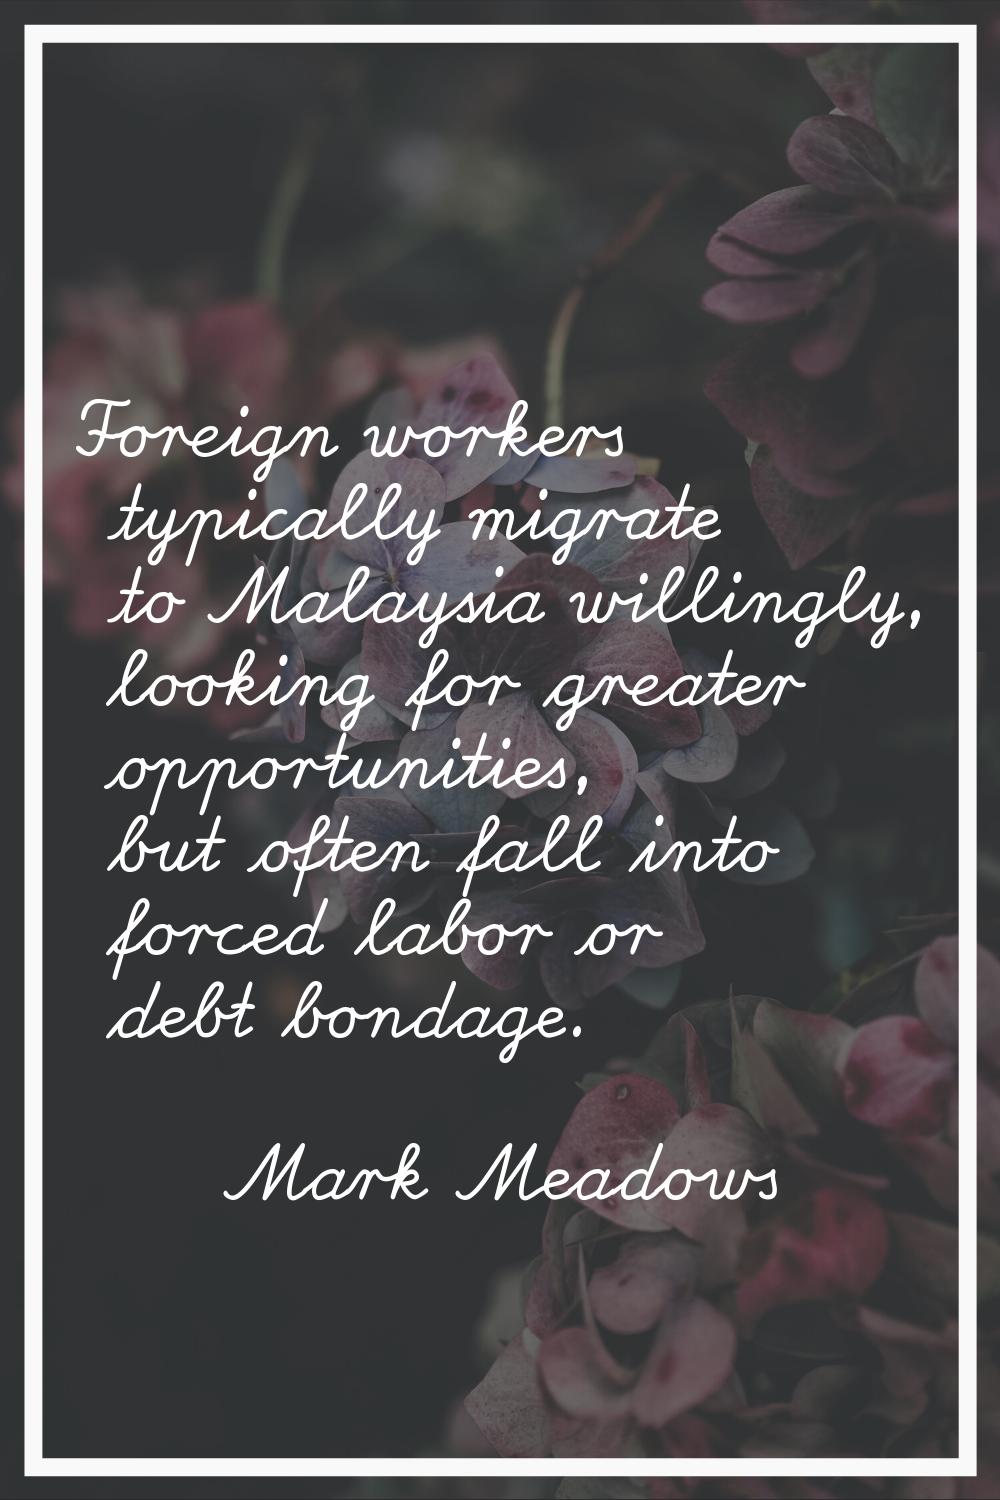 Foreign workers typically migrate to Malaysia willingly, looking for greater opportunities, but oft